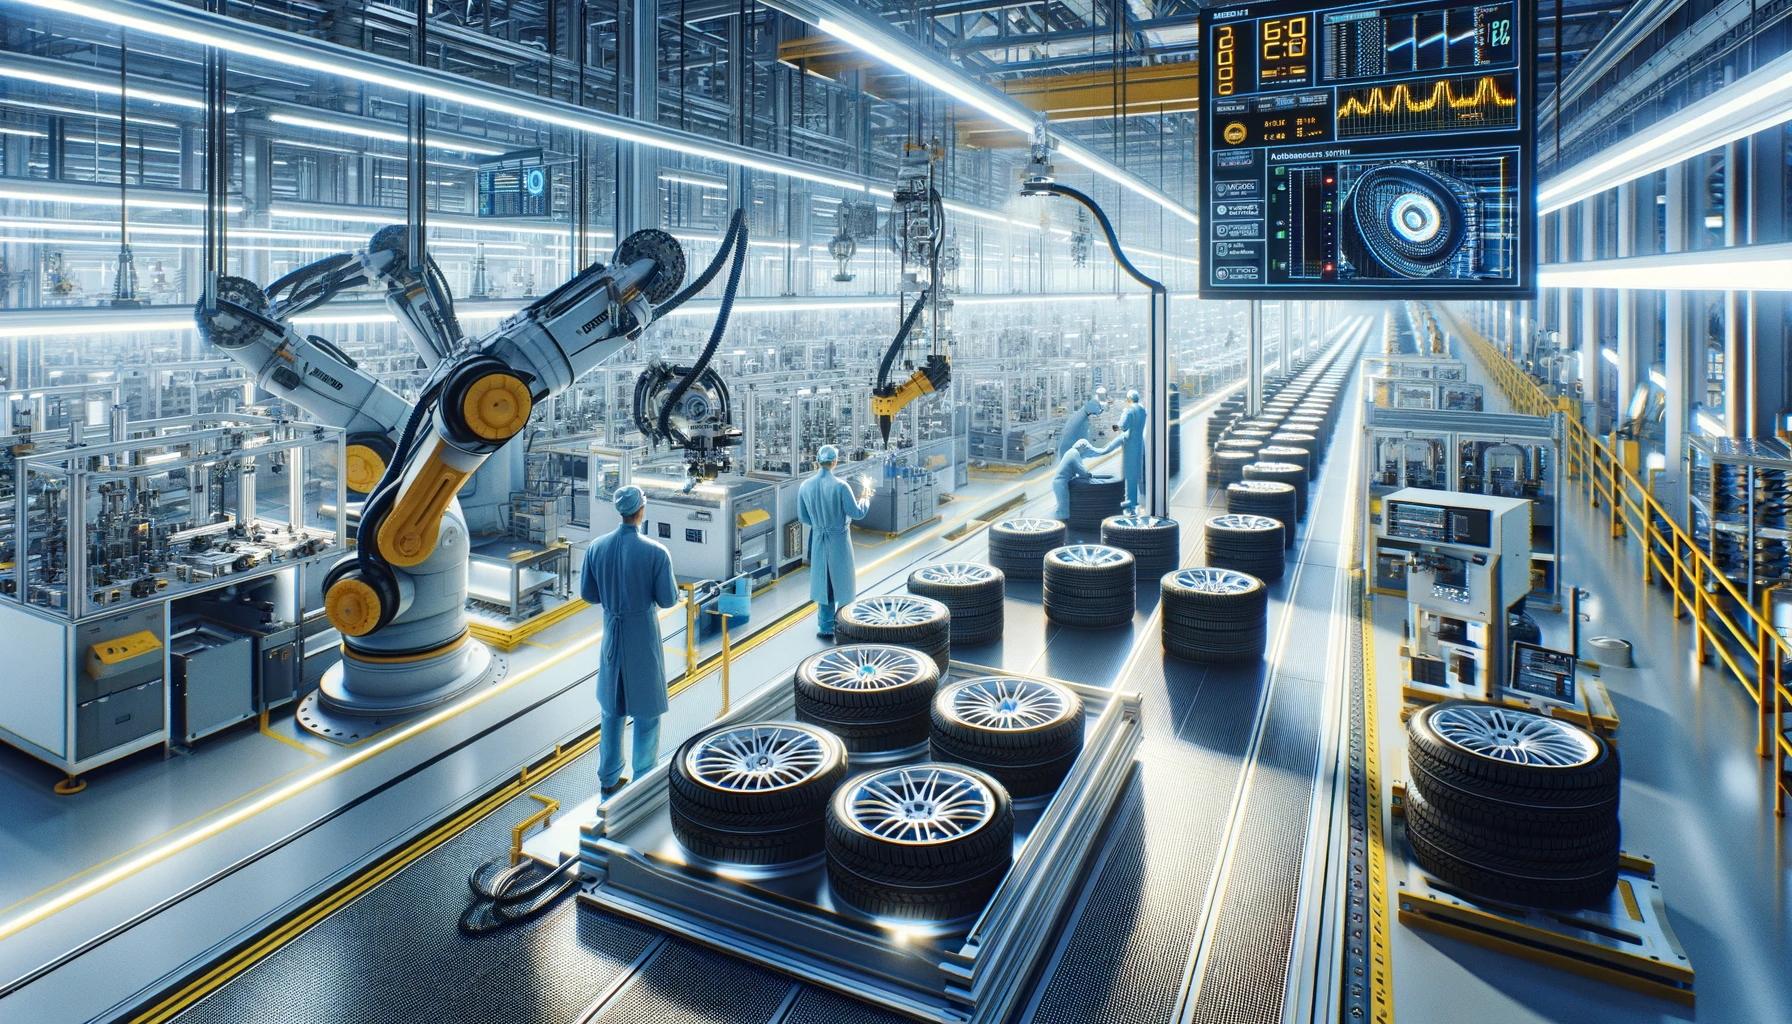 An image depicting the high-quality manufacturing standards of Pirelli tires. Inside a modern, clean, and highly organized Pirelli tire factory, skilled workers are meticulously inspecting and assembling tires. The environment is technologically advanced, with robotic arms and digital displays indicating precision measurements and quality control processes. The lighting is bright, emphasizing the cleanliness and precision of the workspace. The image conveys the commitment of Pirelli to excellence and high standards in tire production. The image is in a 16:9 aspect ratio.